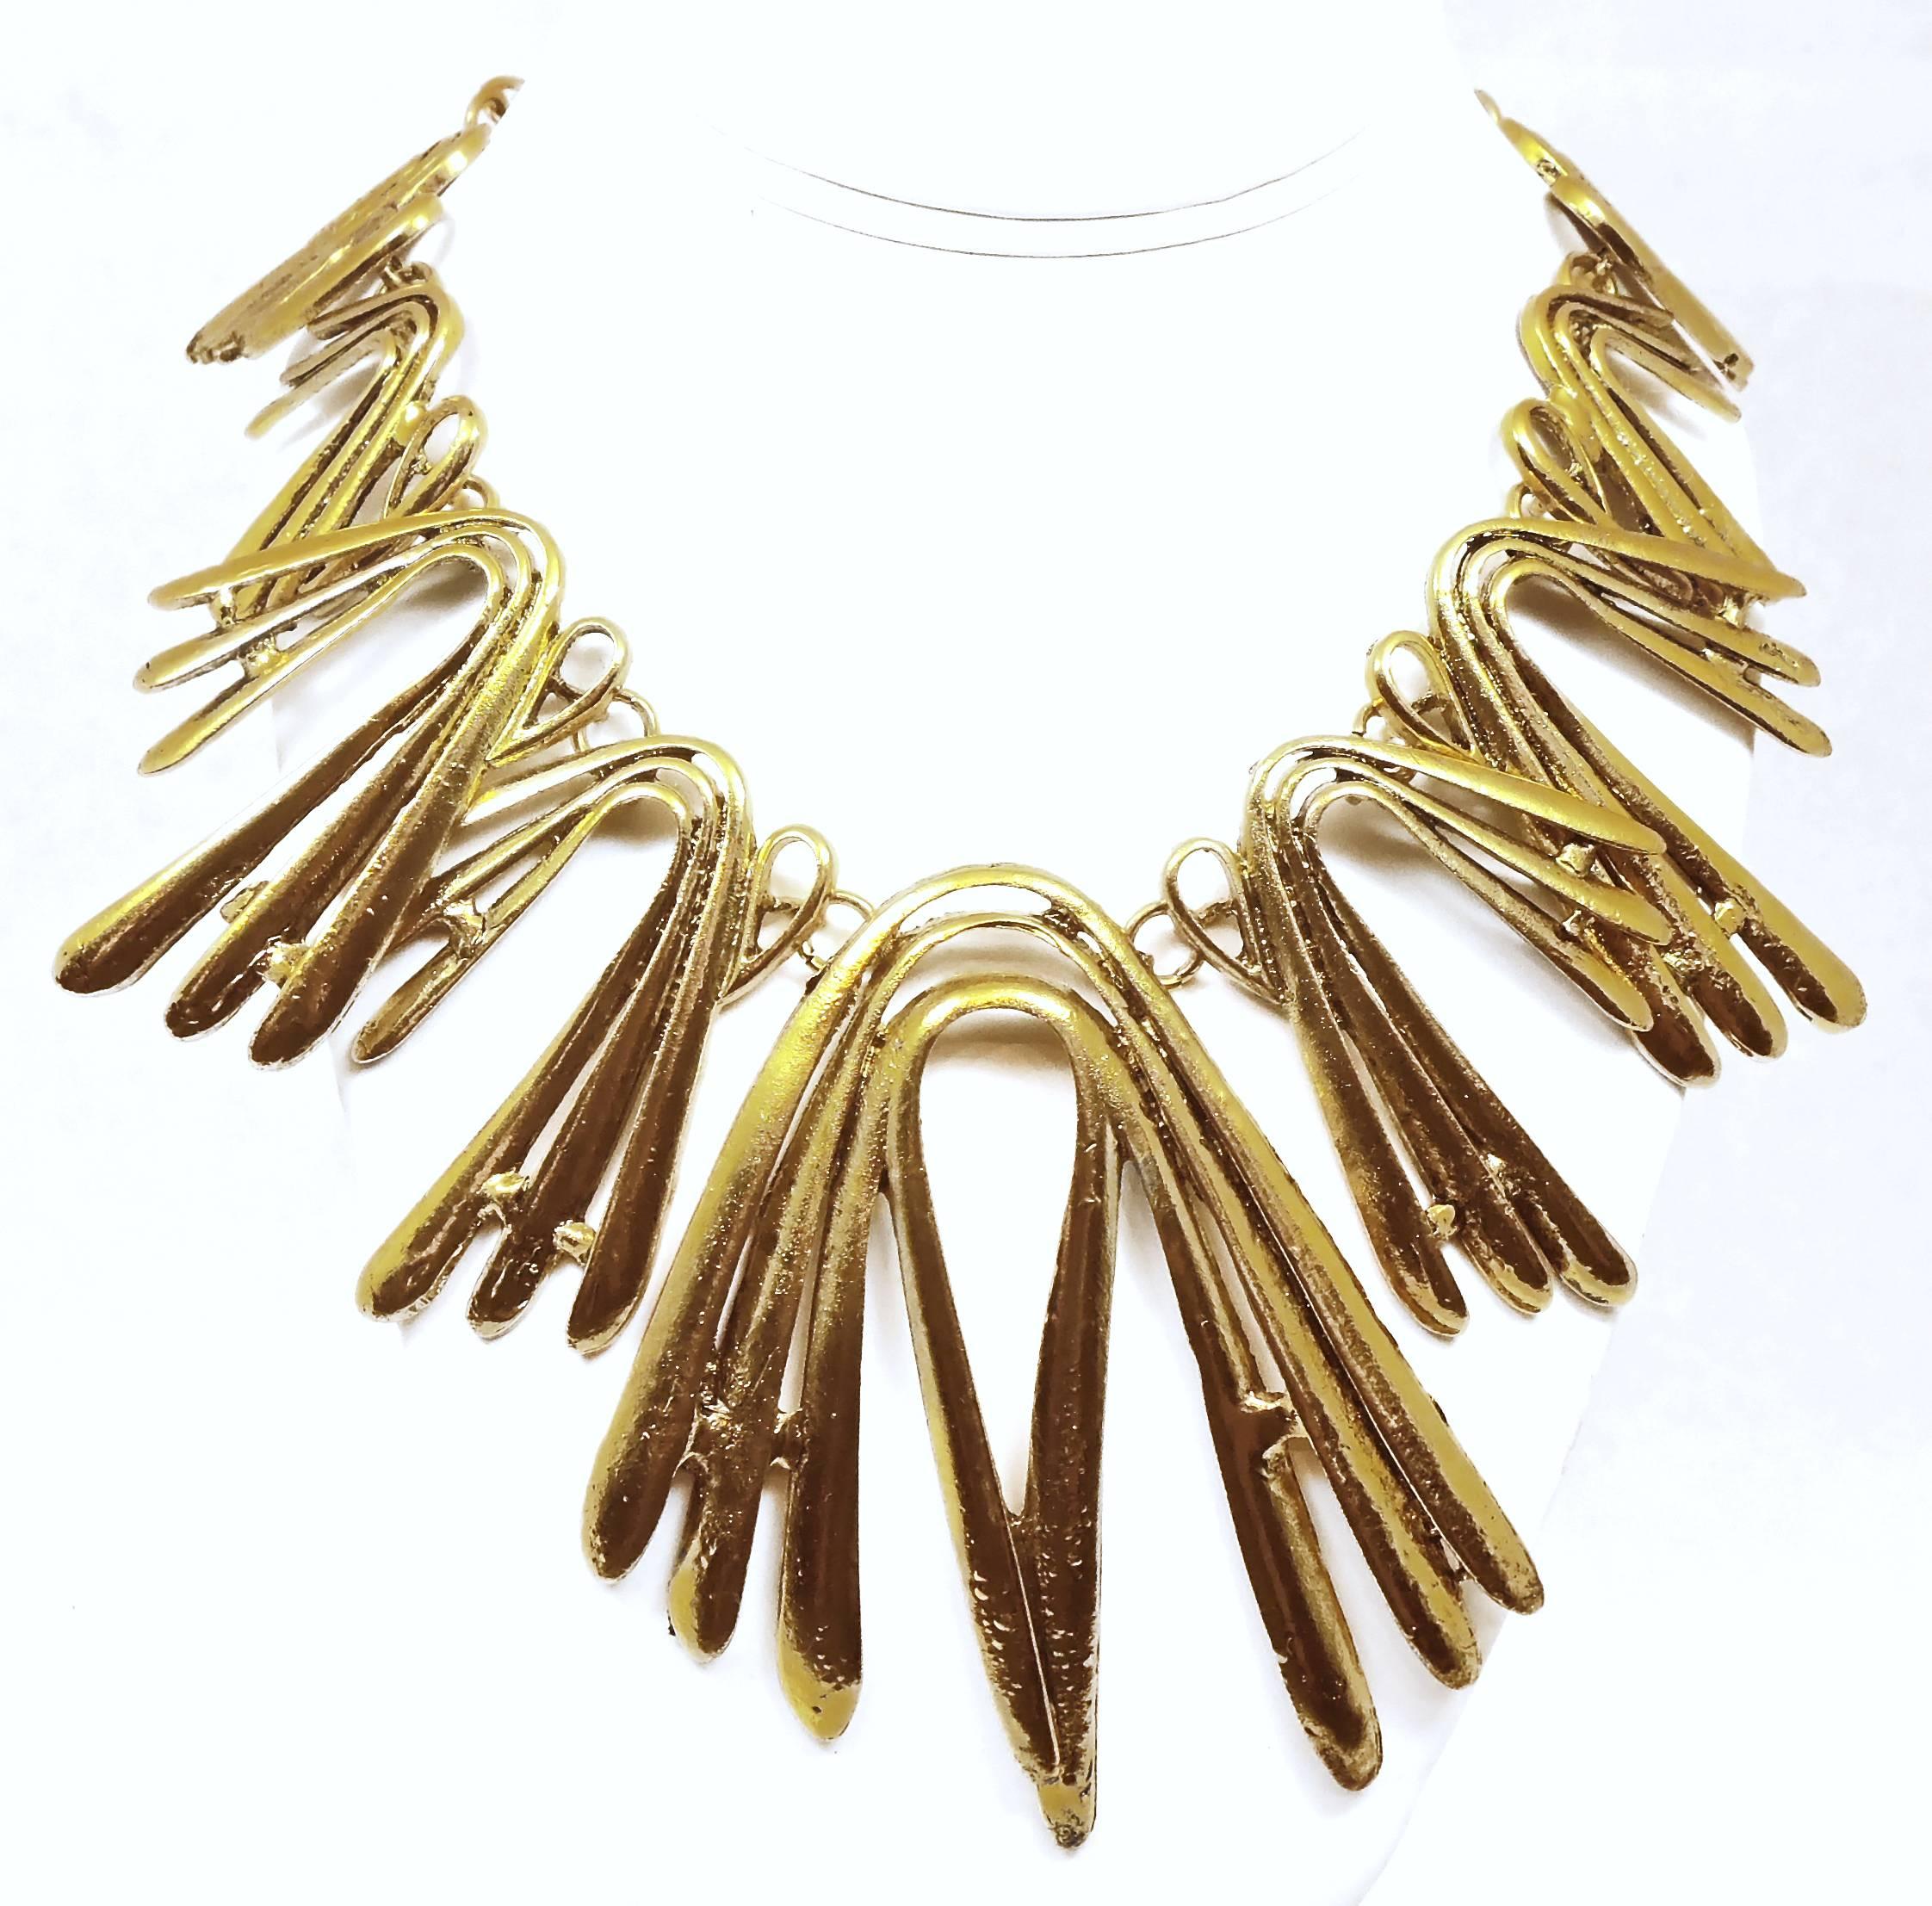 This very much in demand Oscar De La Renta necklace  is bent and shaped to look like gentle spikes. It is made in a gold tone setting and has a lobster clasp and measures 19” x 1/4”. The drop from top to bottom measures 4” x 3”.  It is signed “Oscar